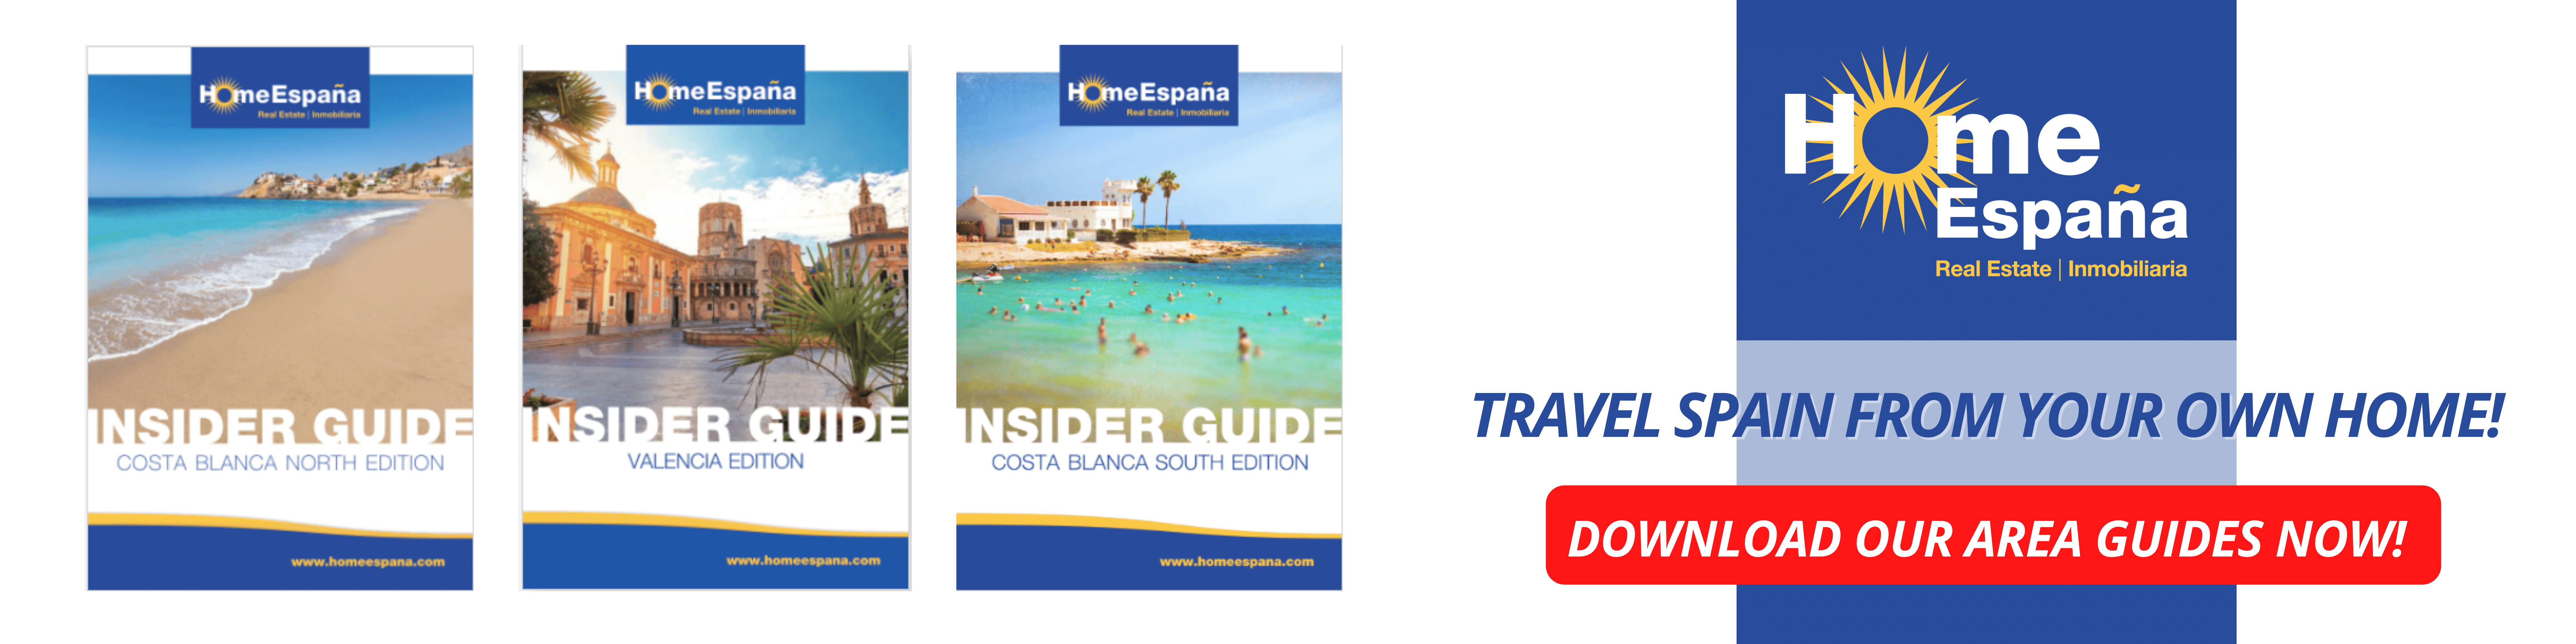 Download our Area Guides